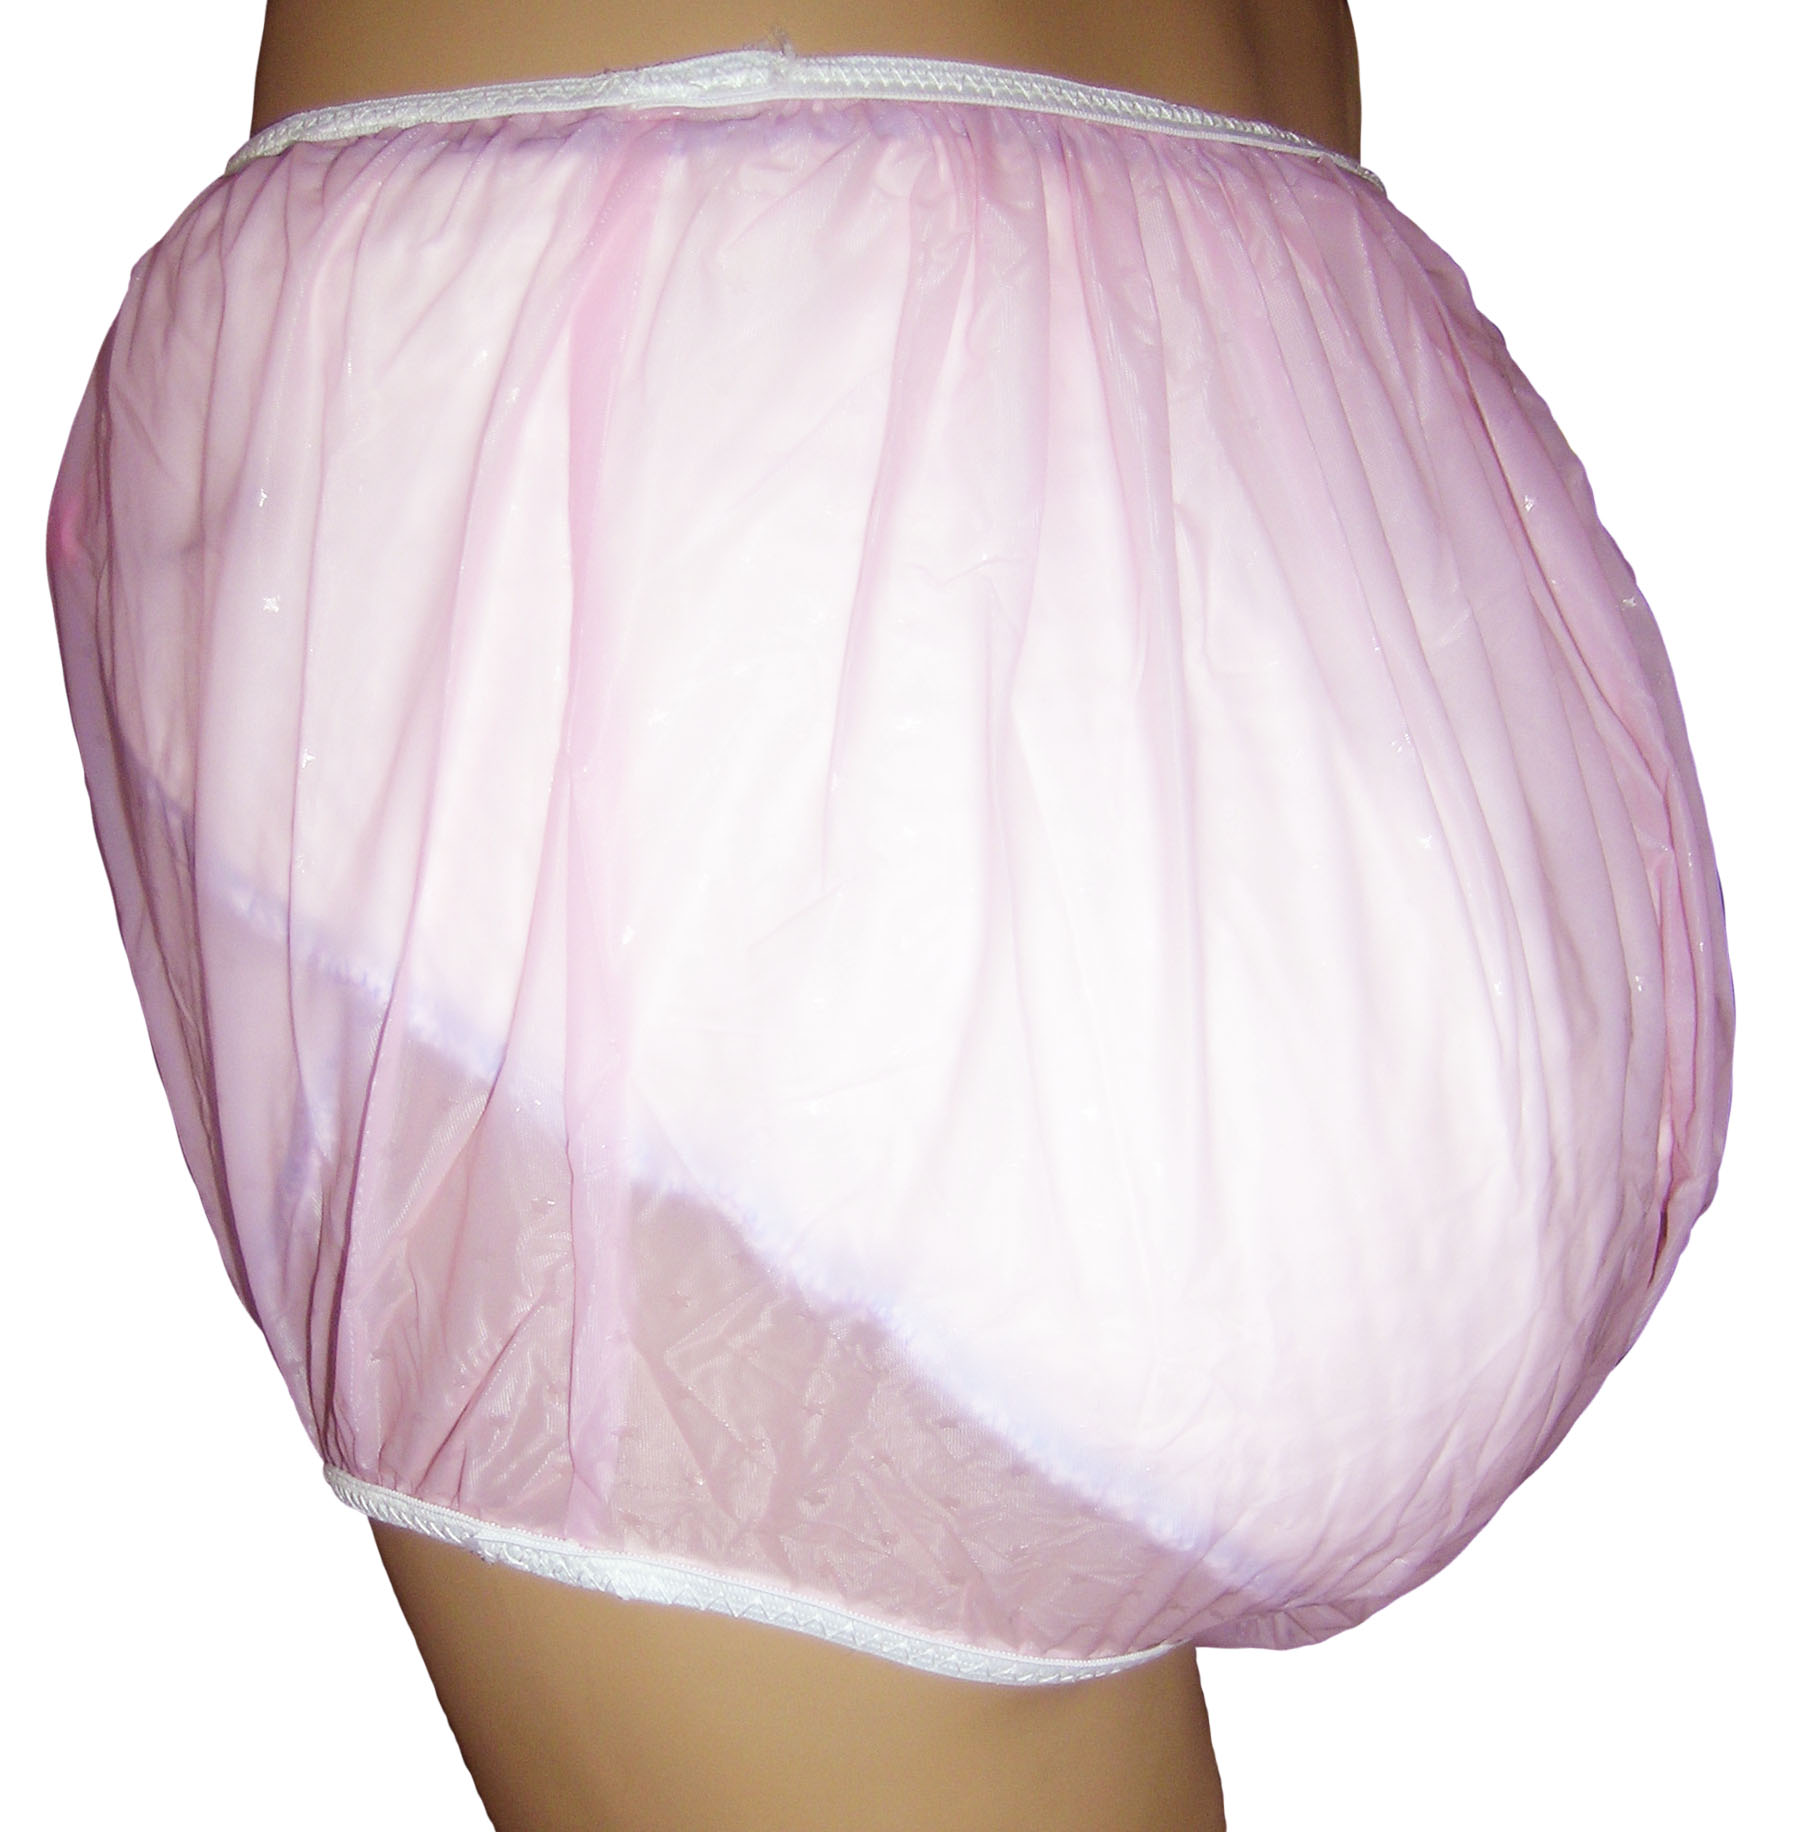 PVC Adult Baby Incontinence Snaper Diaper Rubber Pants Pink